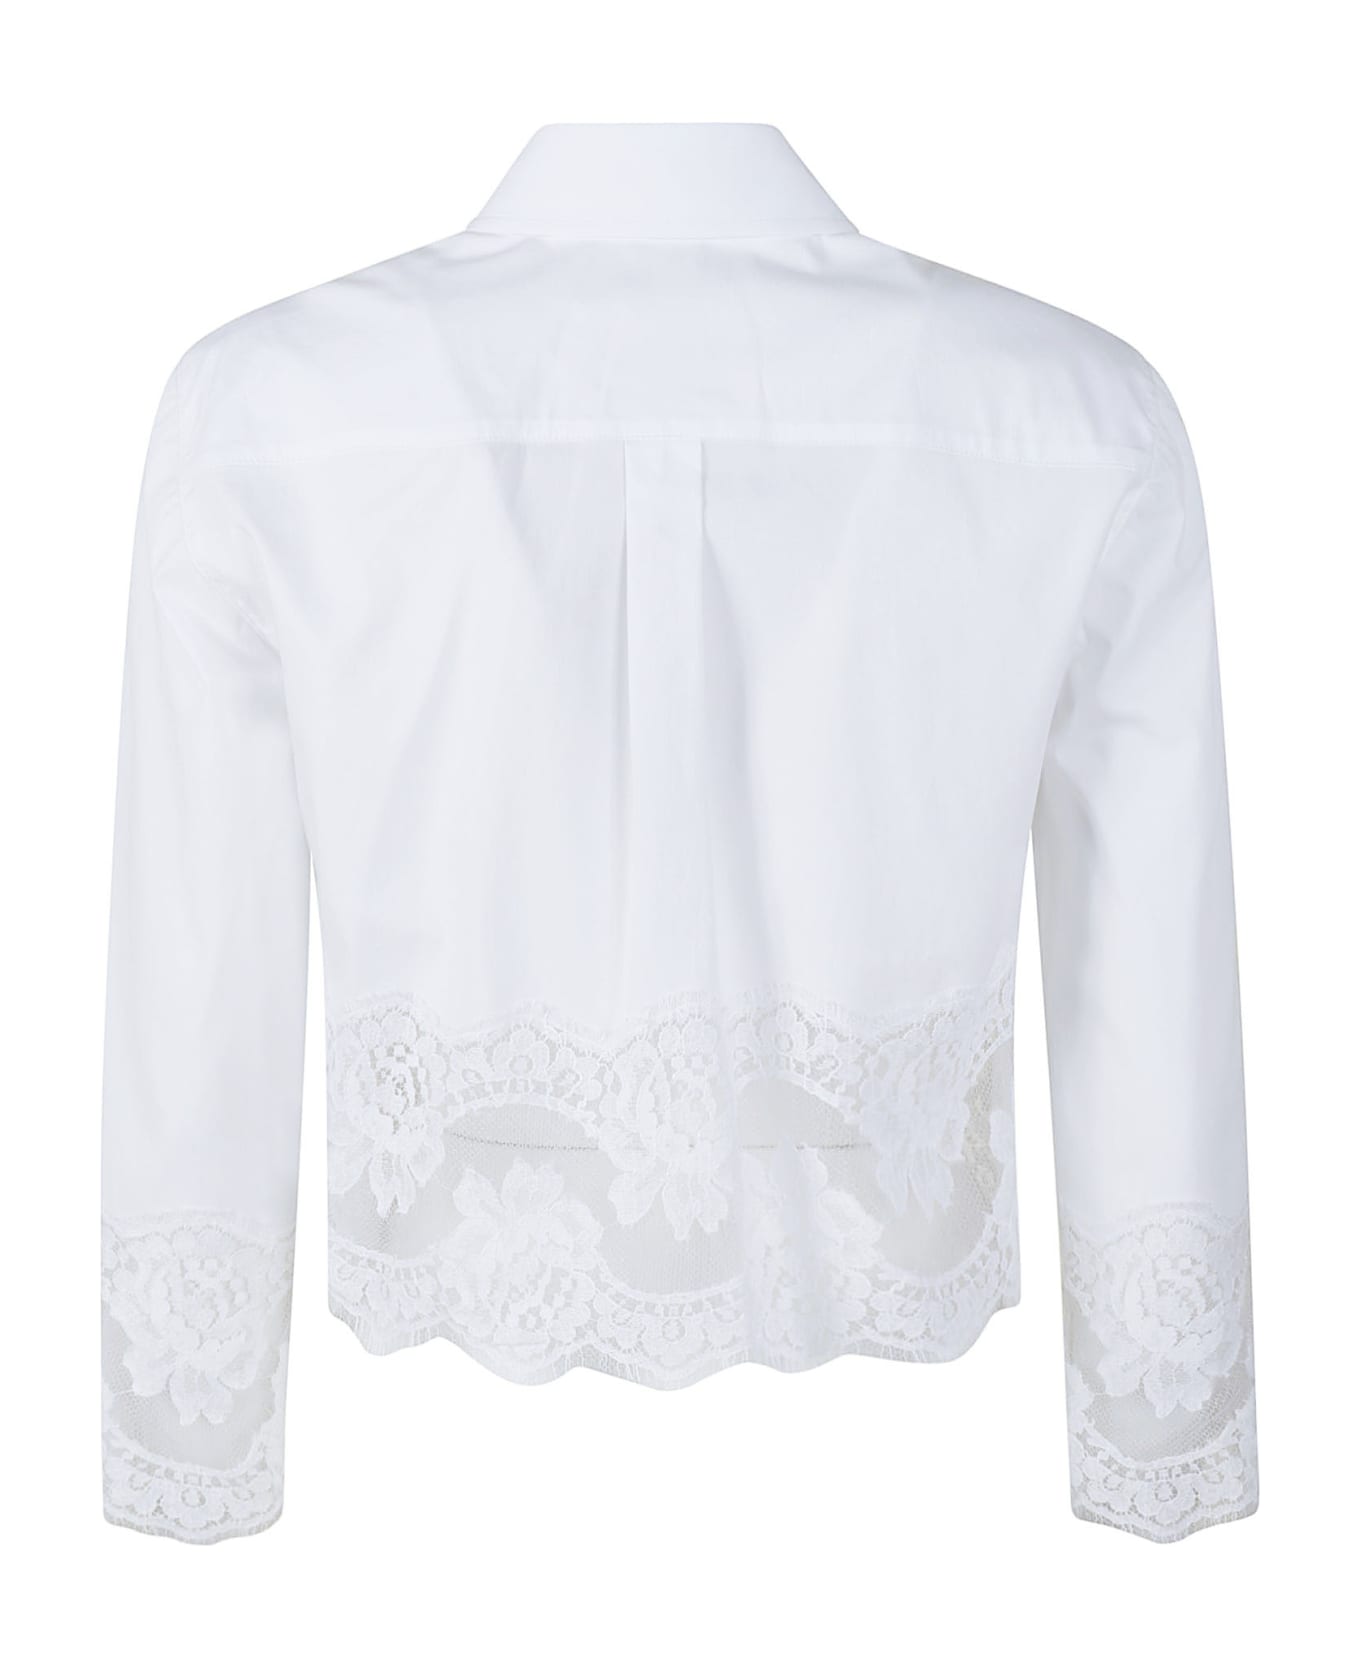 Dolce & Gabbana Lace Floral Cropped Shirt - White